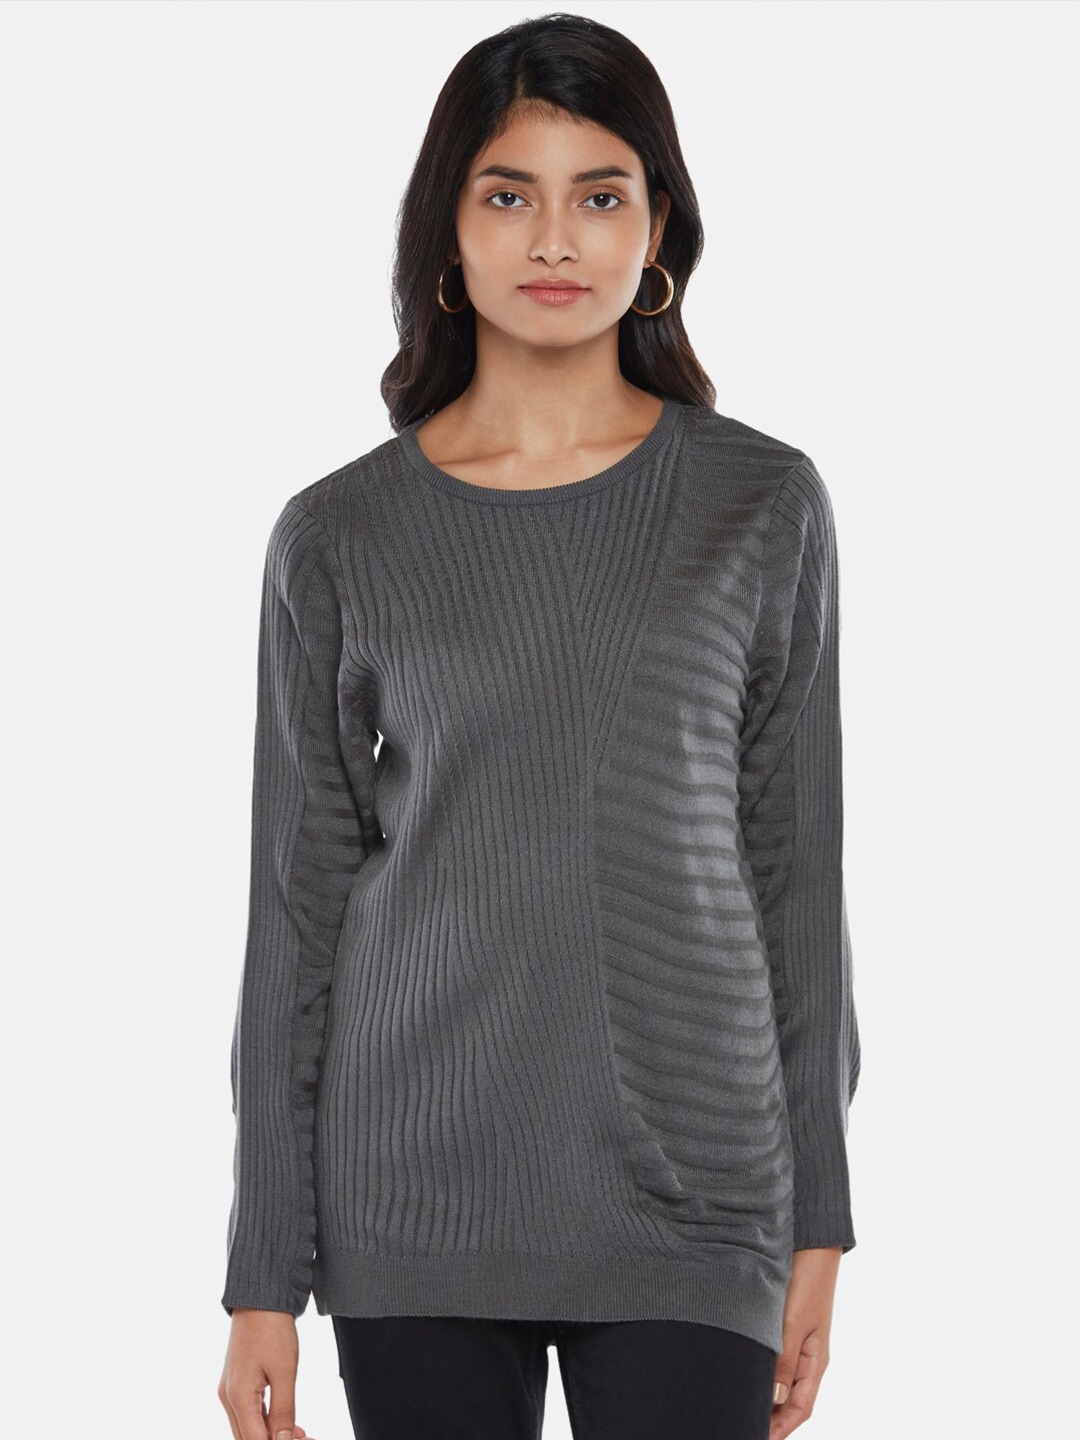 Honey by Pantaloons Women Grey Cable Knit Striped Pullover Sweater Price in India